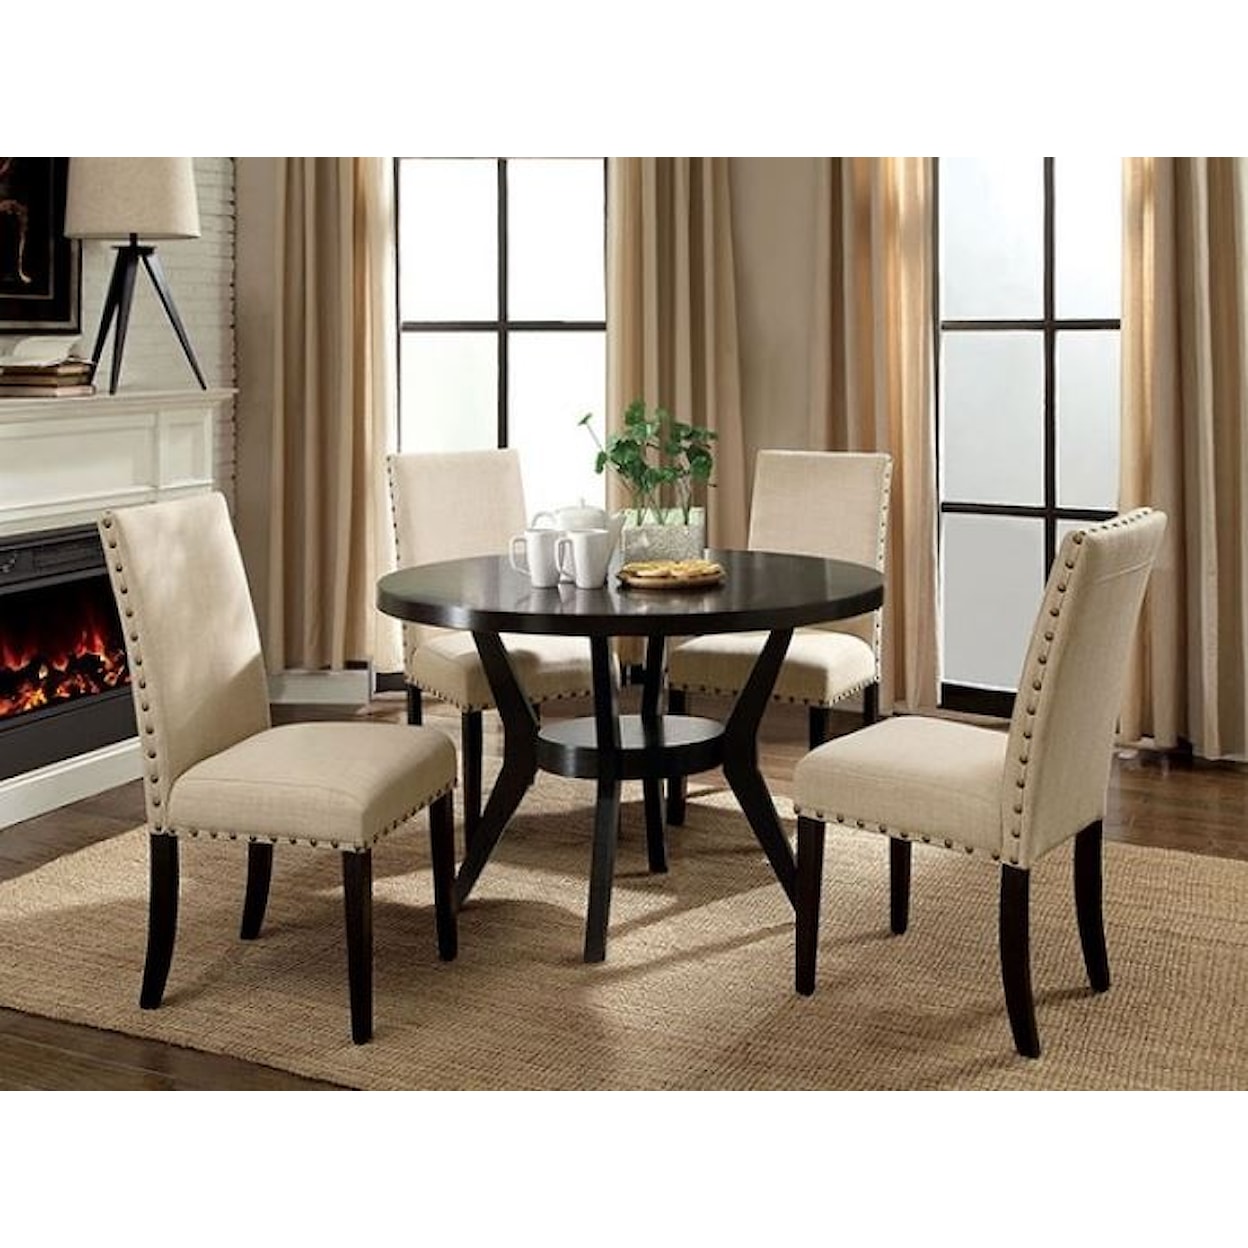 Furniture of America Downtown 5-Piece Dining Set